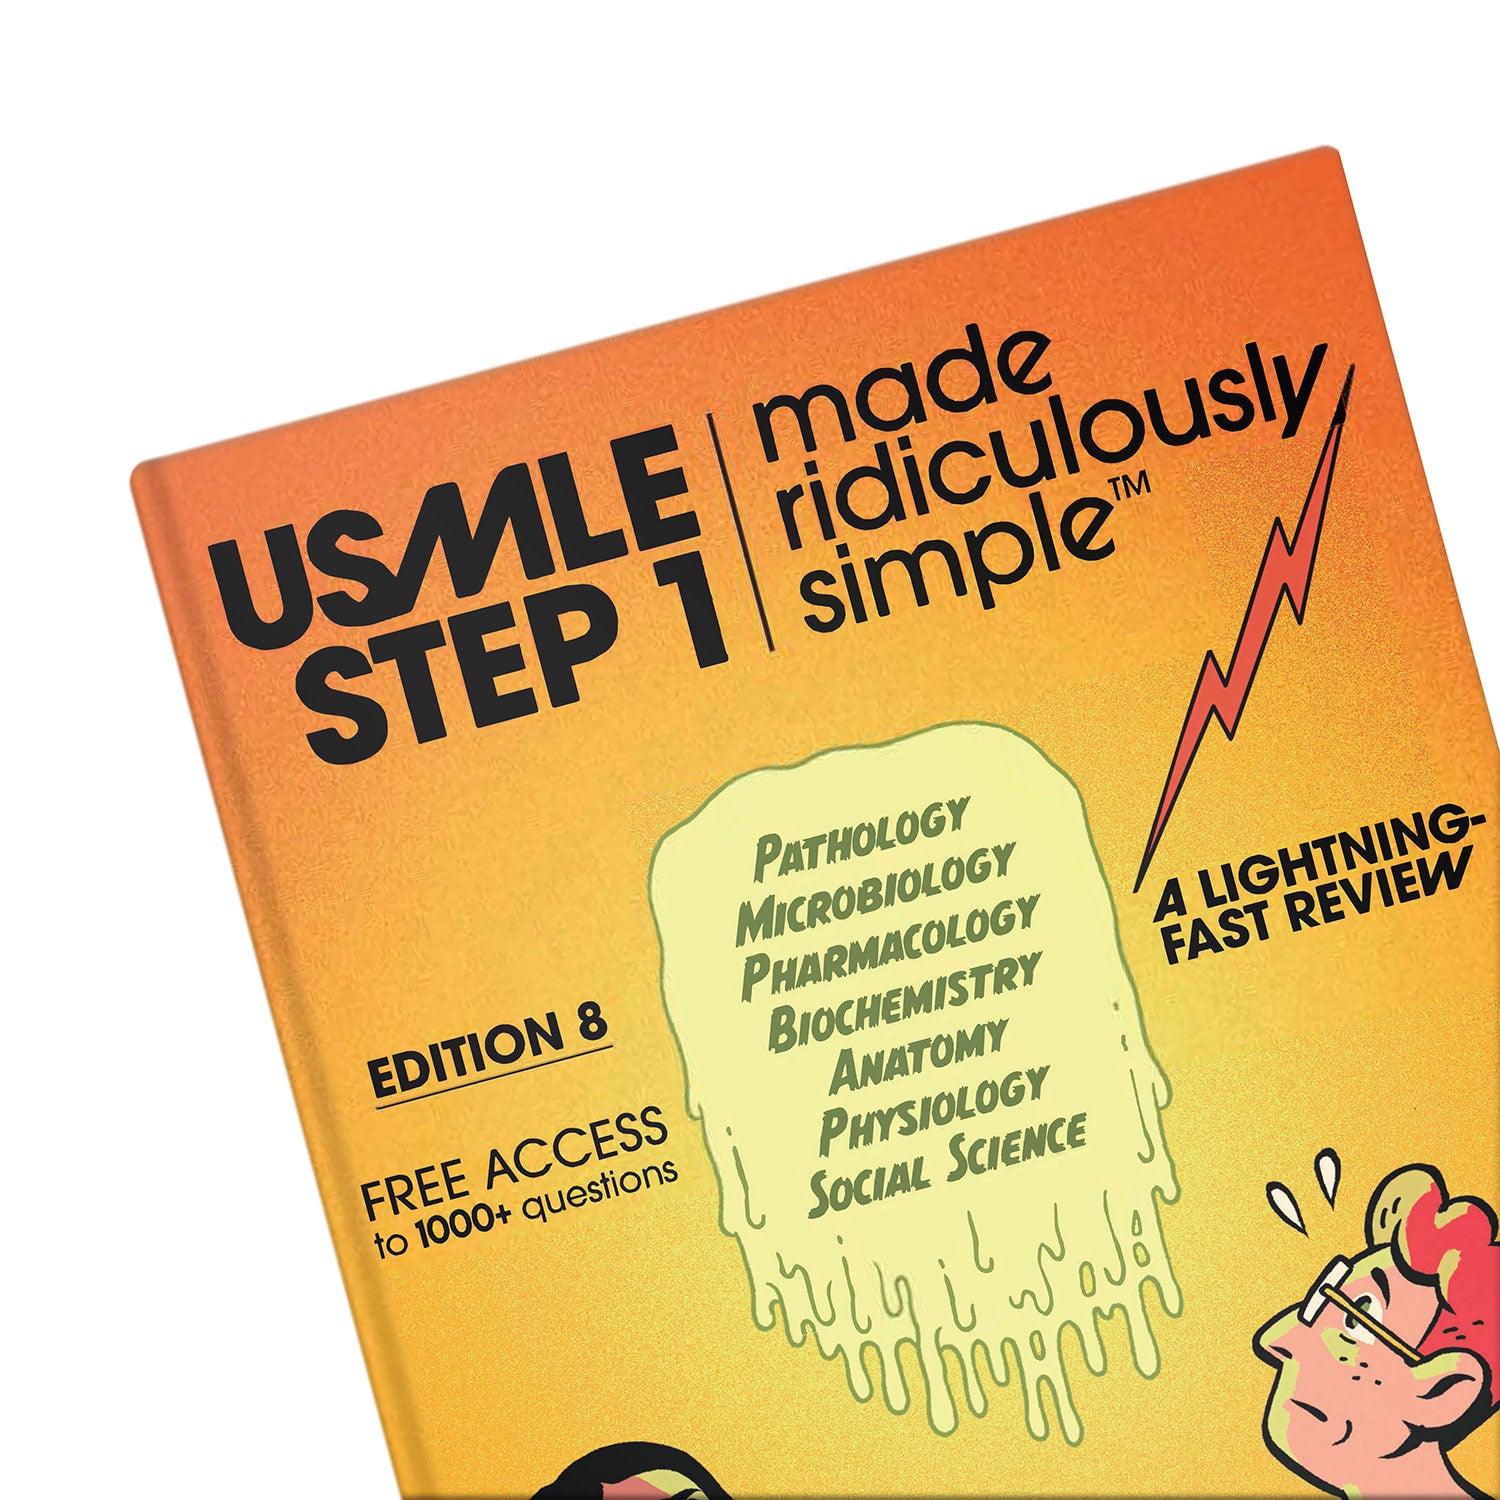 USMLE Step 1 Made Ridiculously Simple, 2024 Color Edition